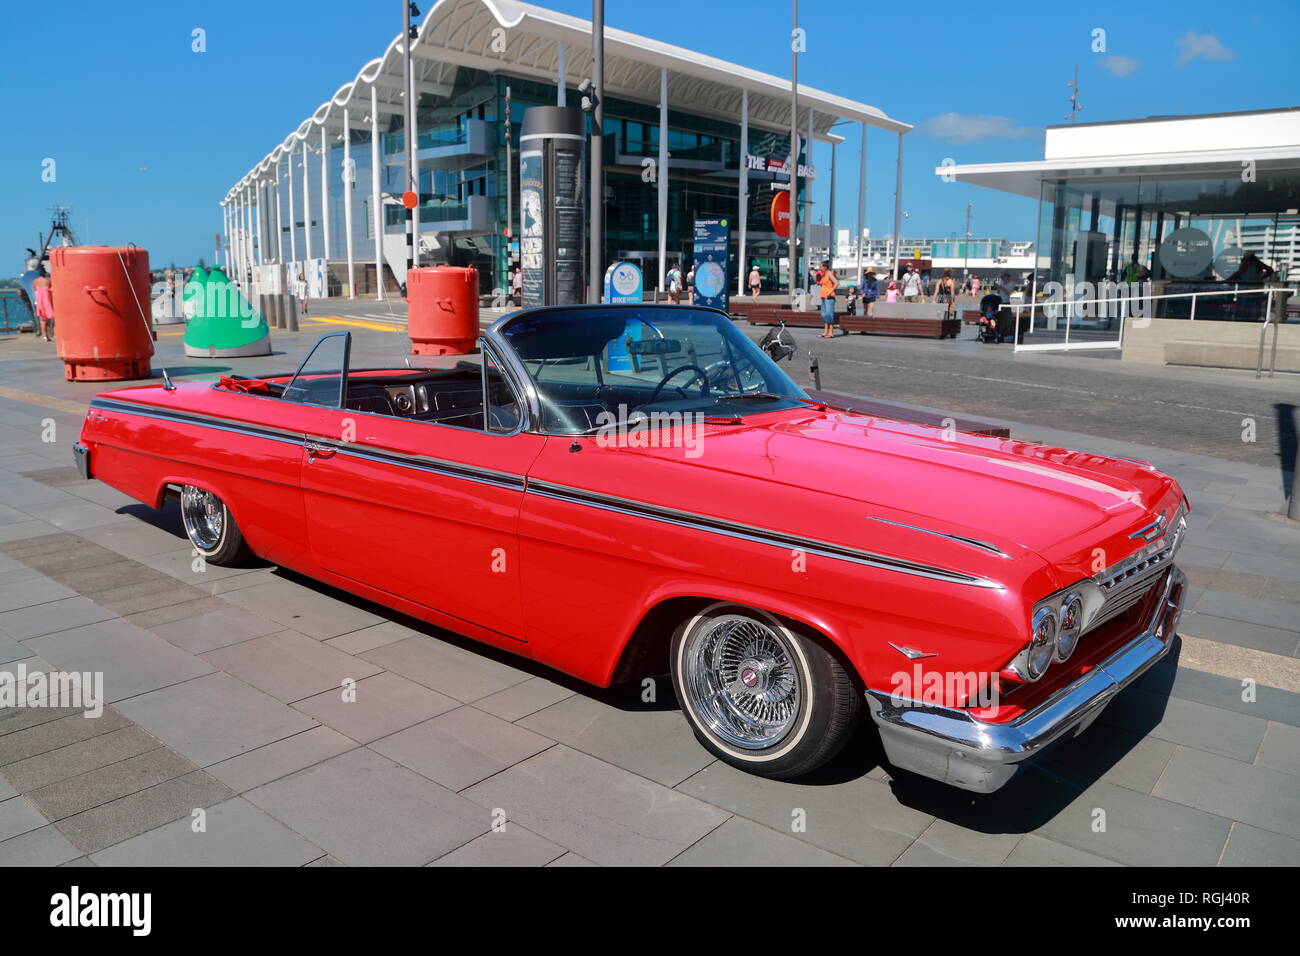 Classic 60s Chevrolet Impala cabriolet in Auckland harbour, New Zealand Stock Photo